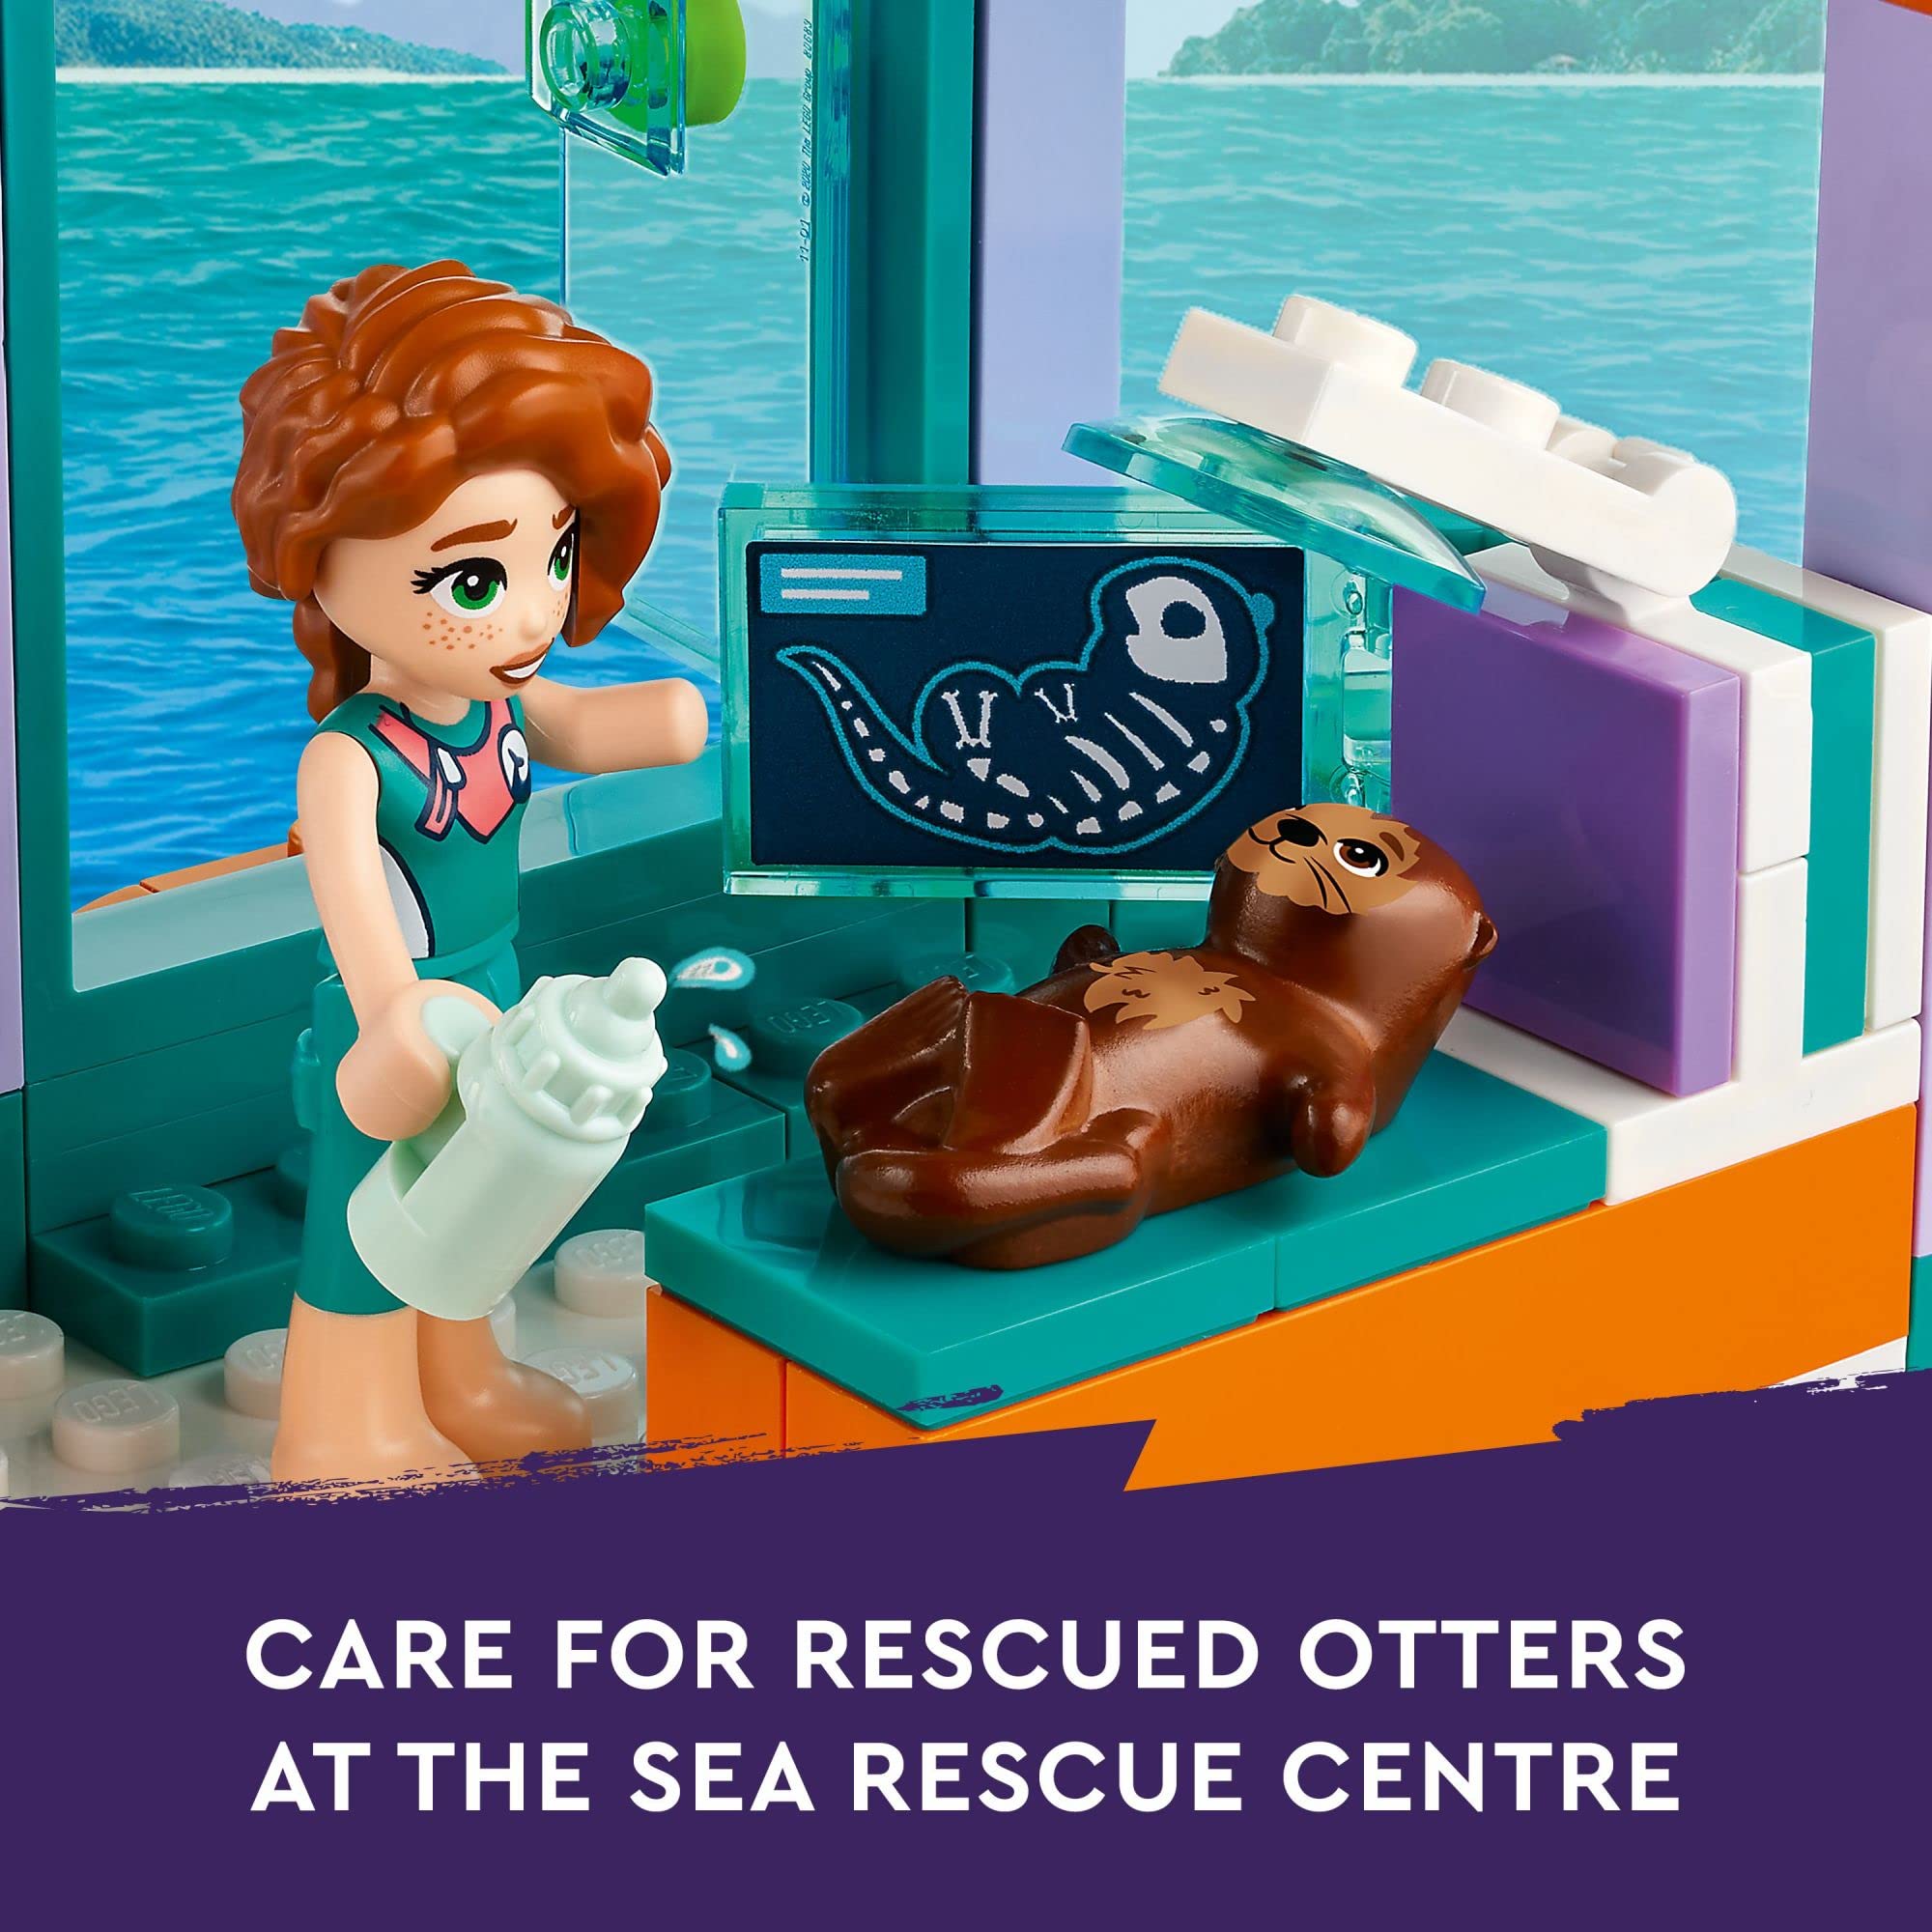 LEGO Friends Sea Rescue Center 41736 Building Toy for Ages 7+, with 3 Mini-Dolls, 2 Otters, a Seahorse, Turtle and Water Scooter, a Great Birthday Gift for Pretend Ocean Rescue Play